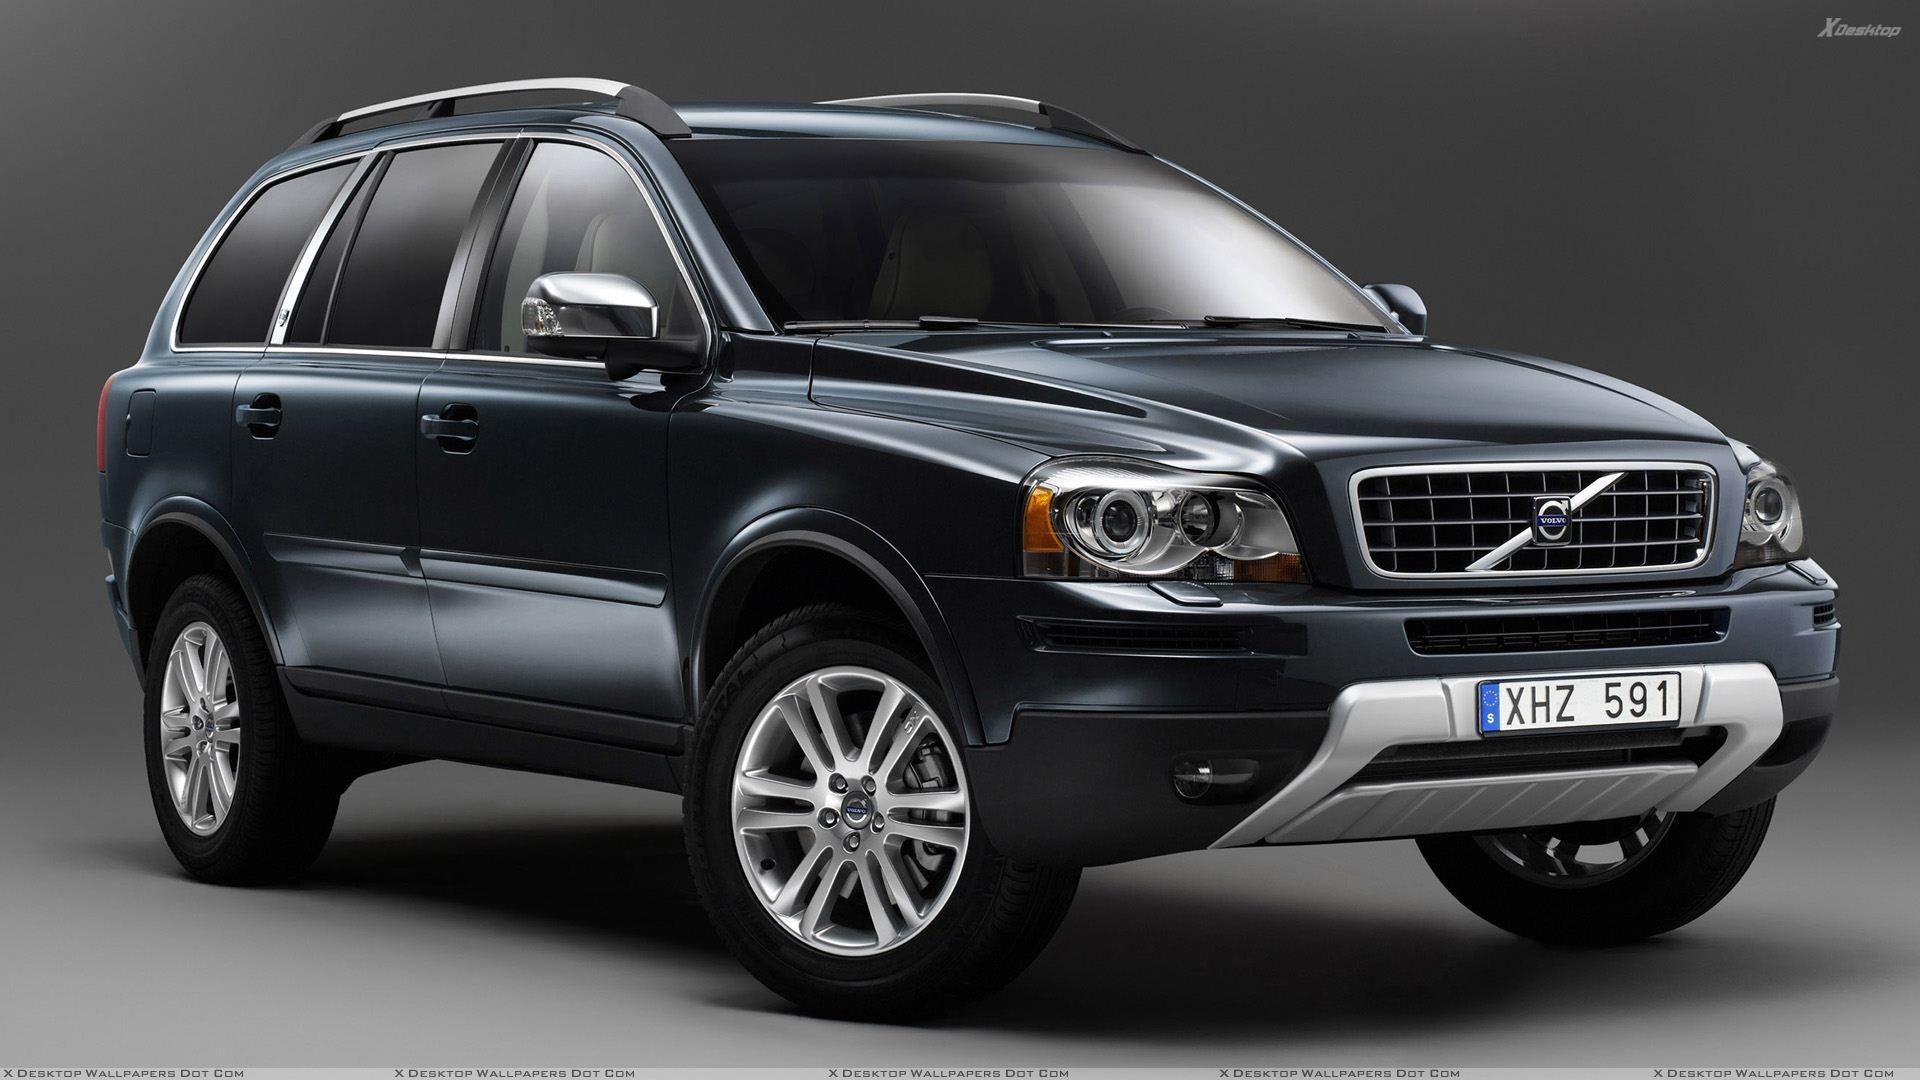 Volvo XC Wallpapers, Photos & Wallpaper in HD